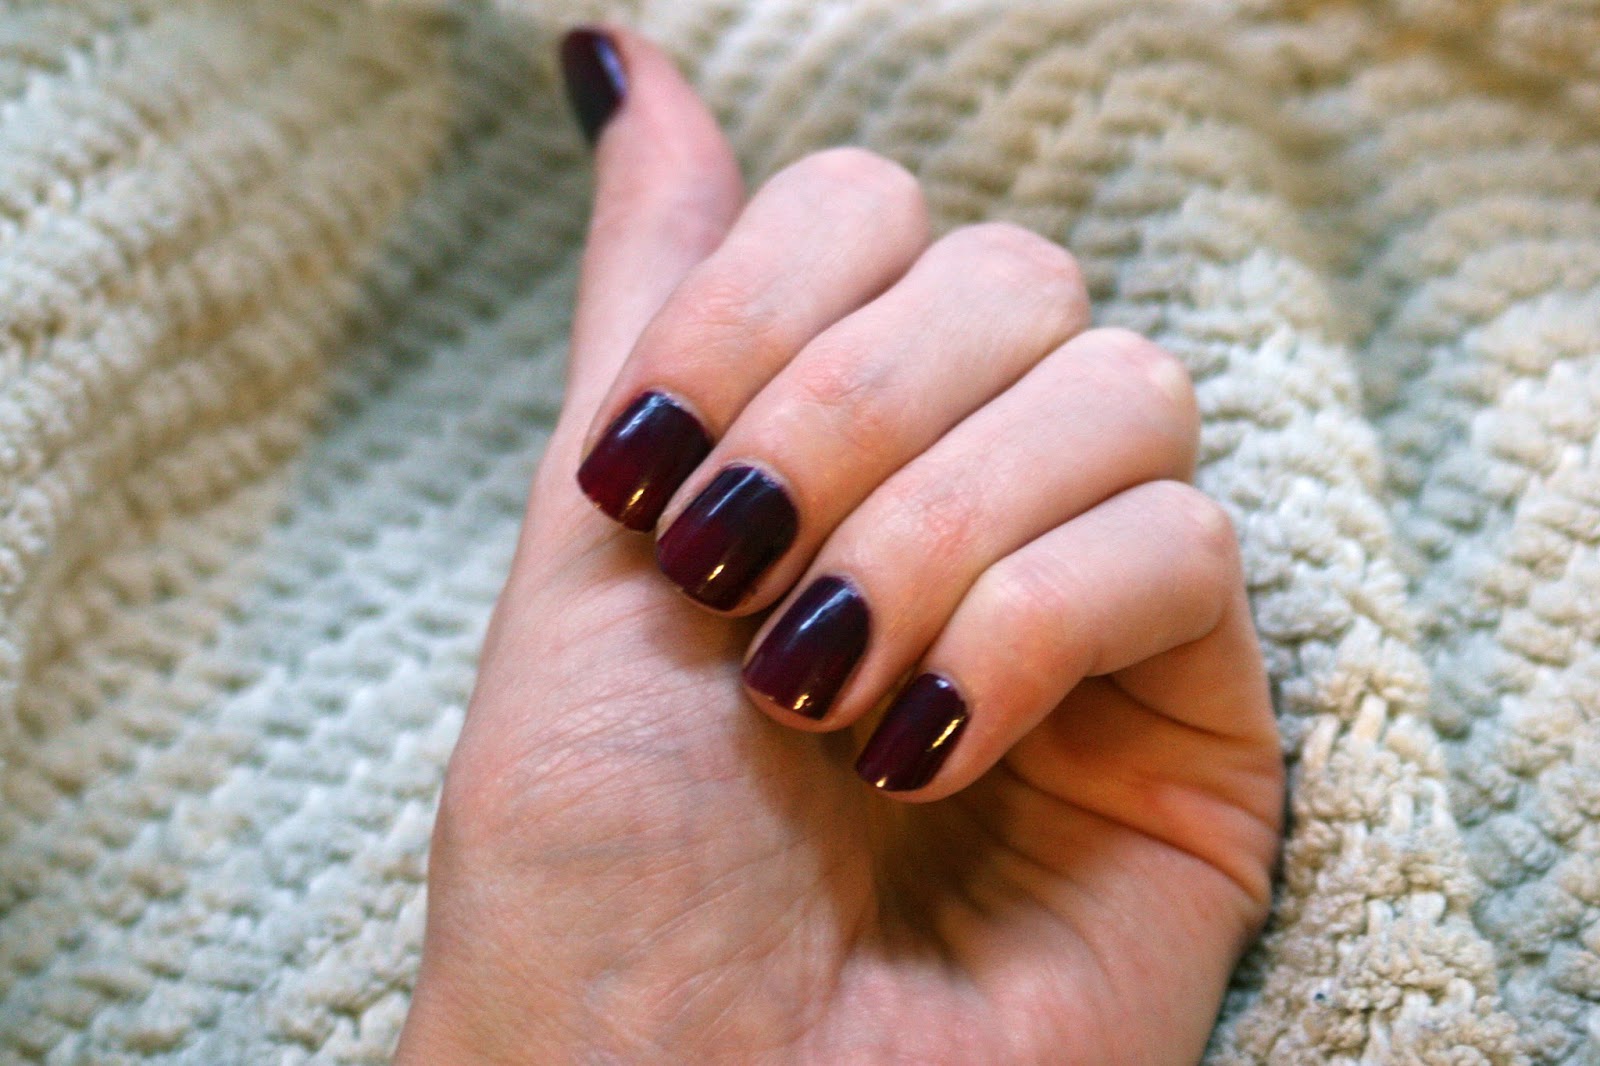 4. "Subtle Nail Art Ideas for a Chic and Elegant Look" - wide 2